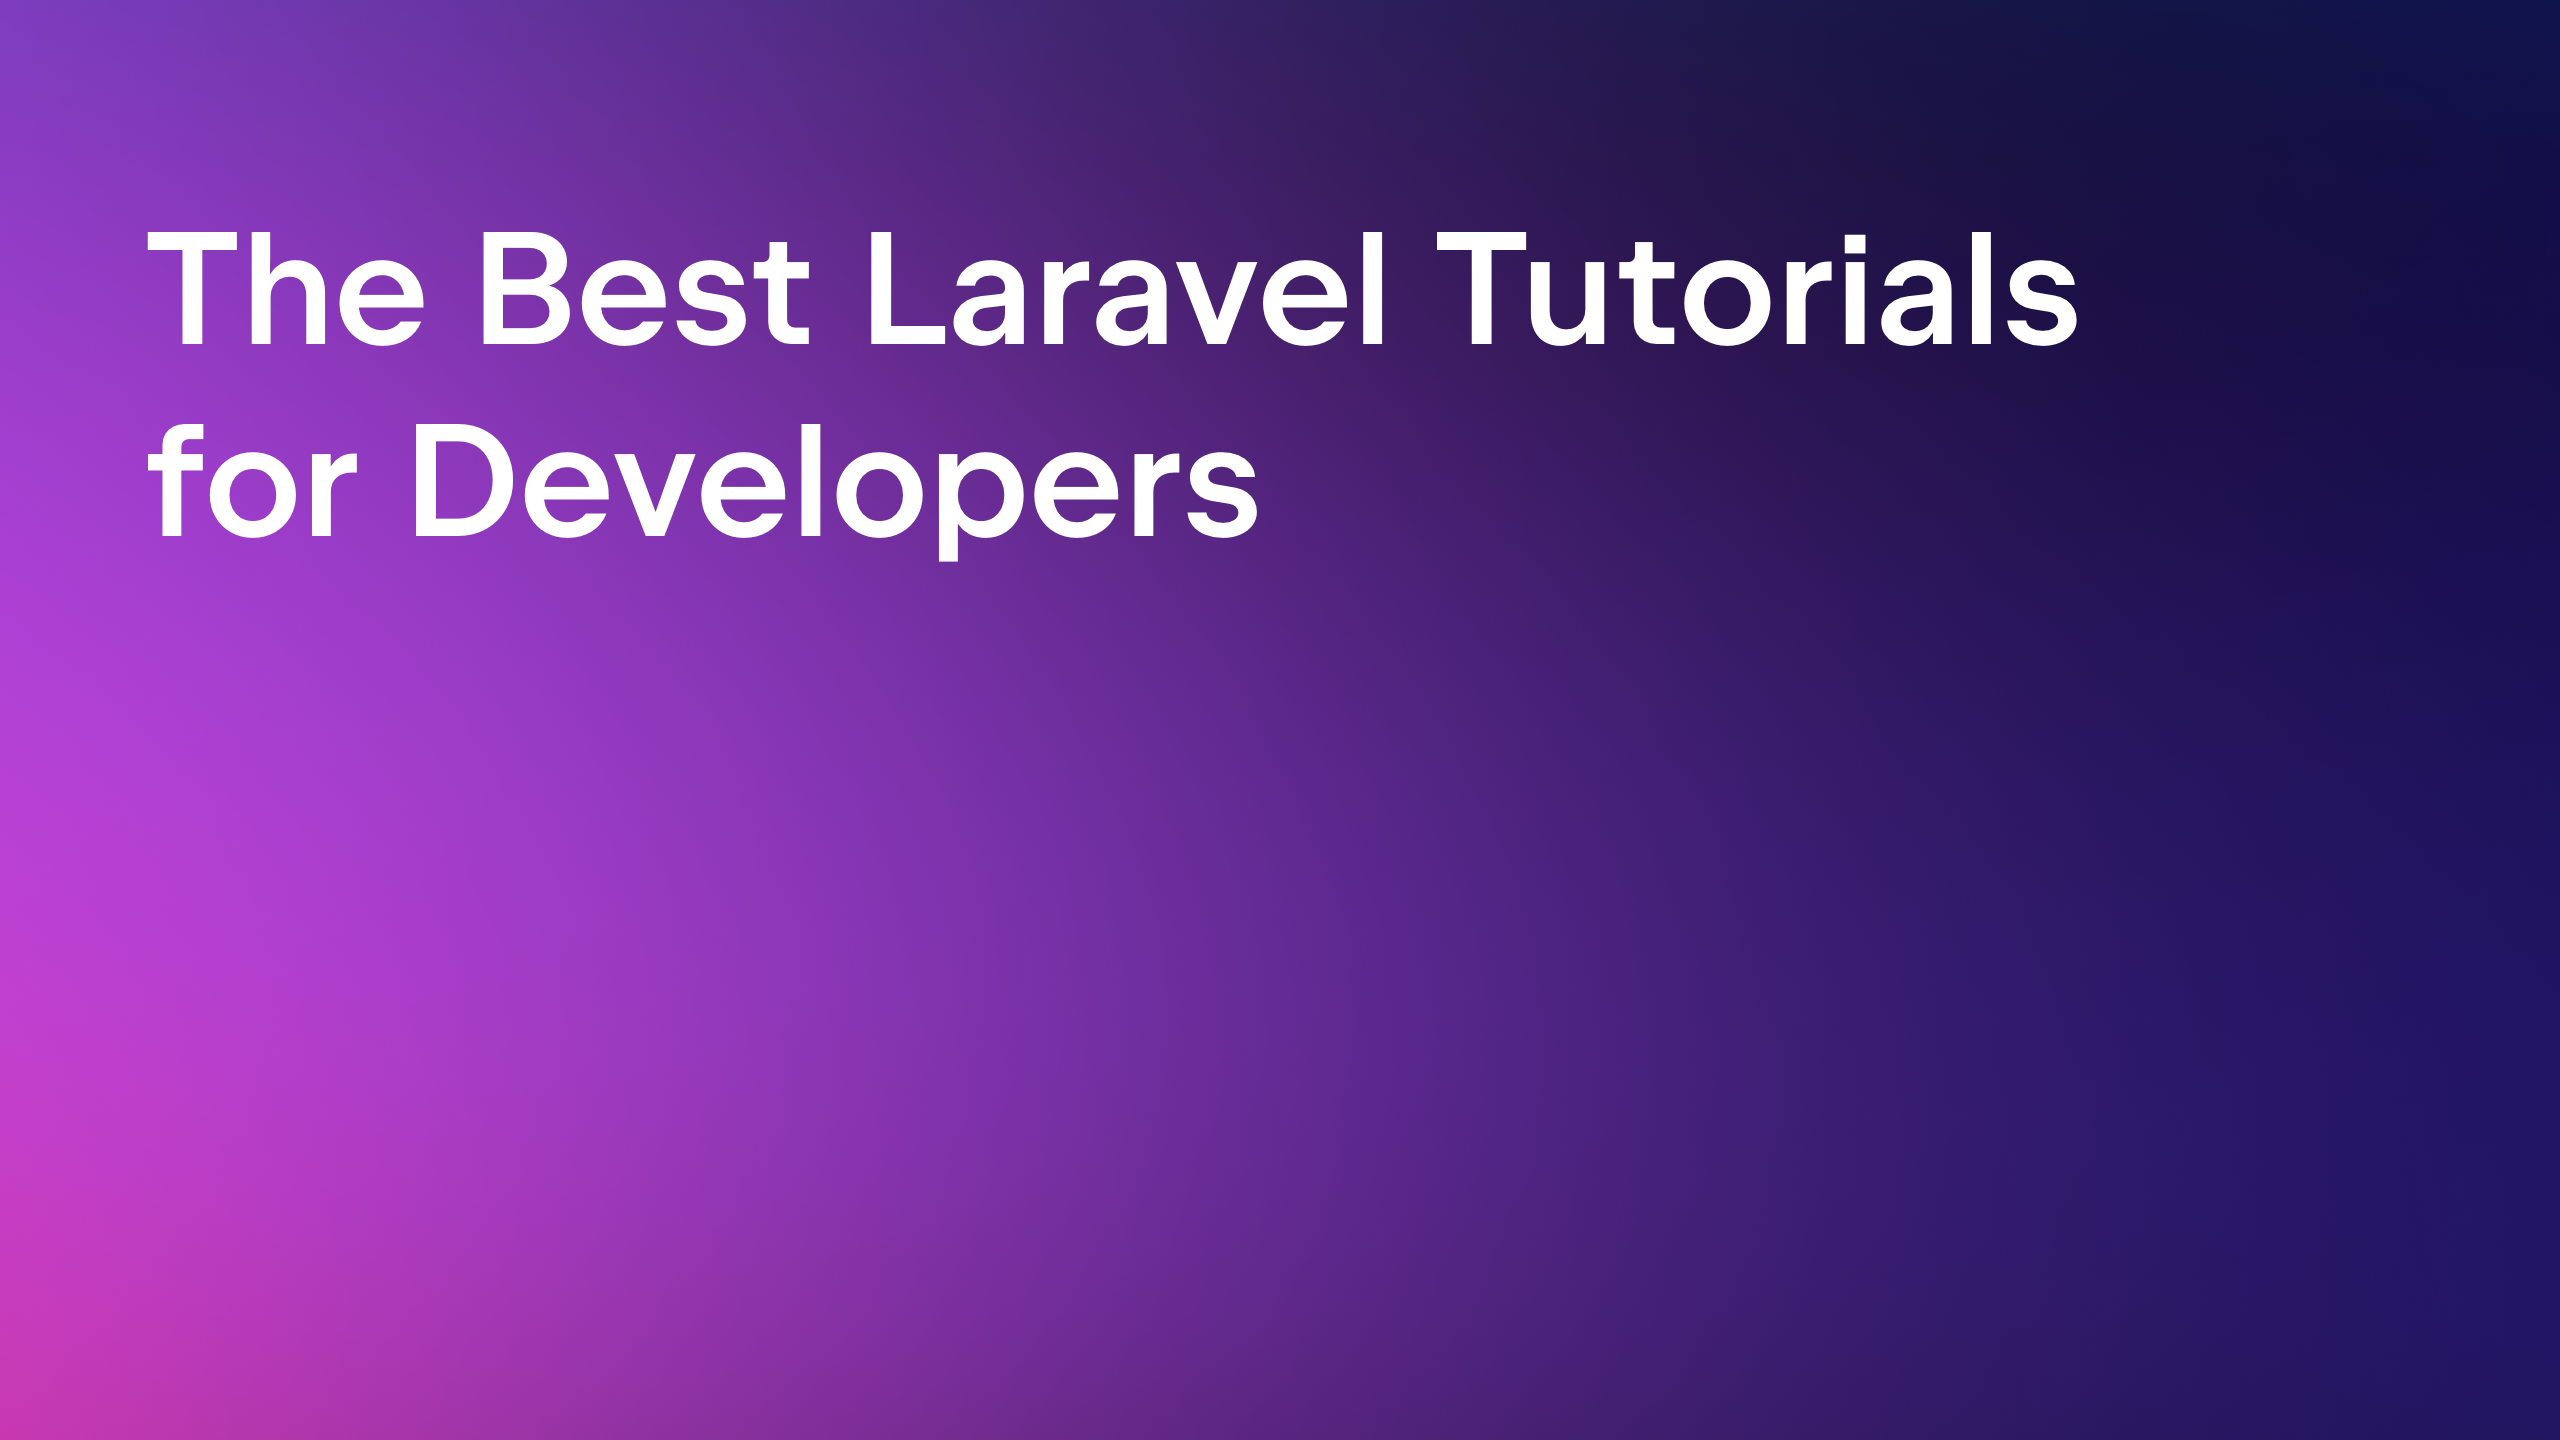 The Best Laravel Tutorials and Resources for Developers